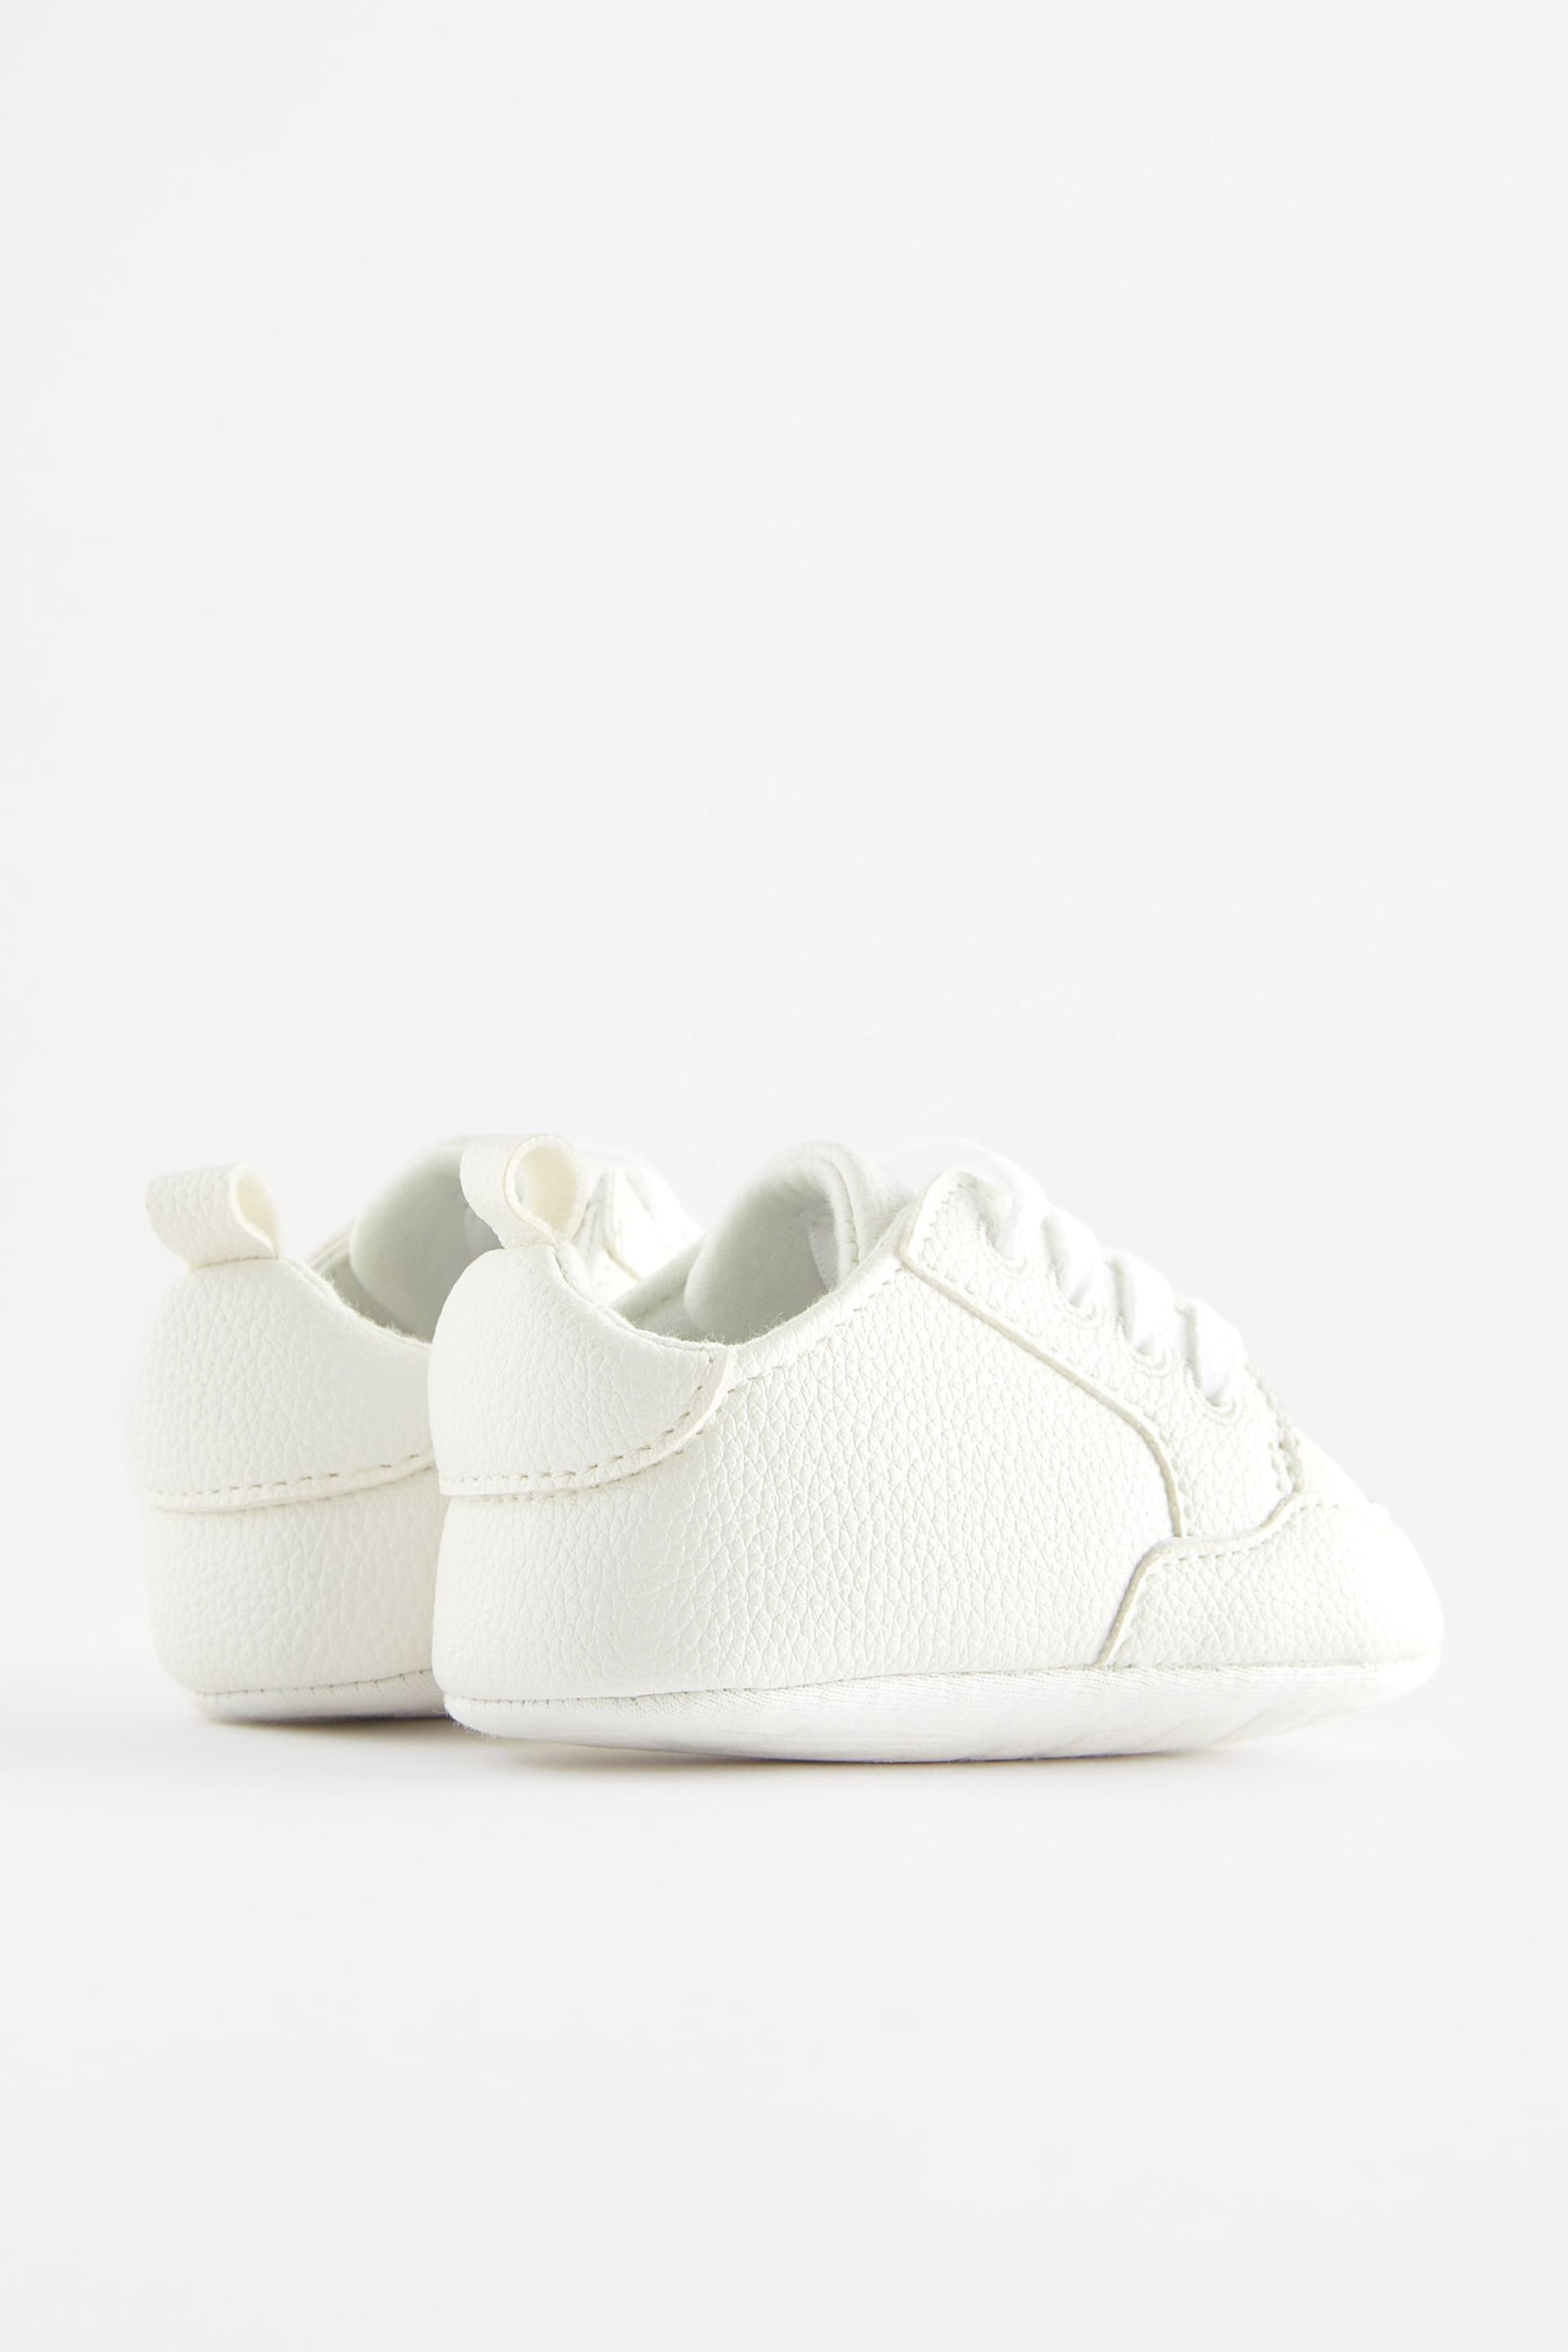 White Lace-Up Baby Trainers (0-24mths) - Image 6 of 7